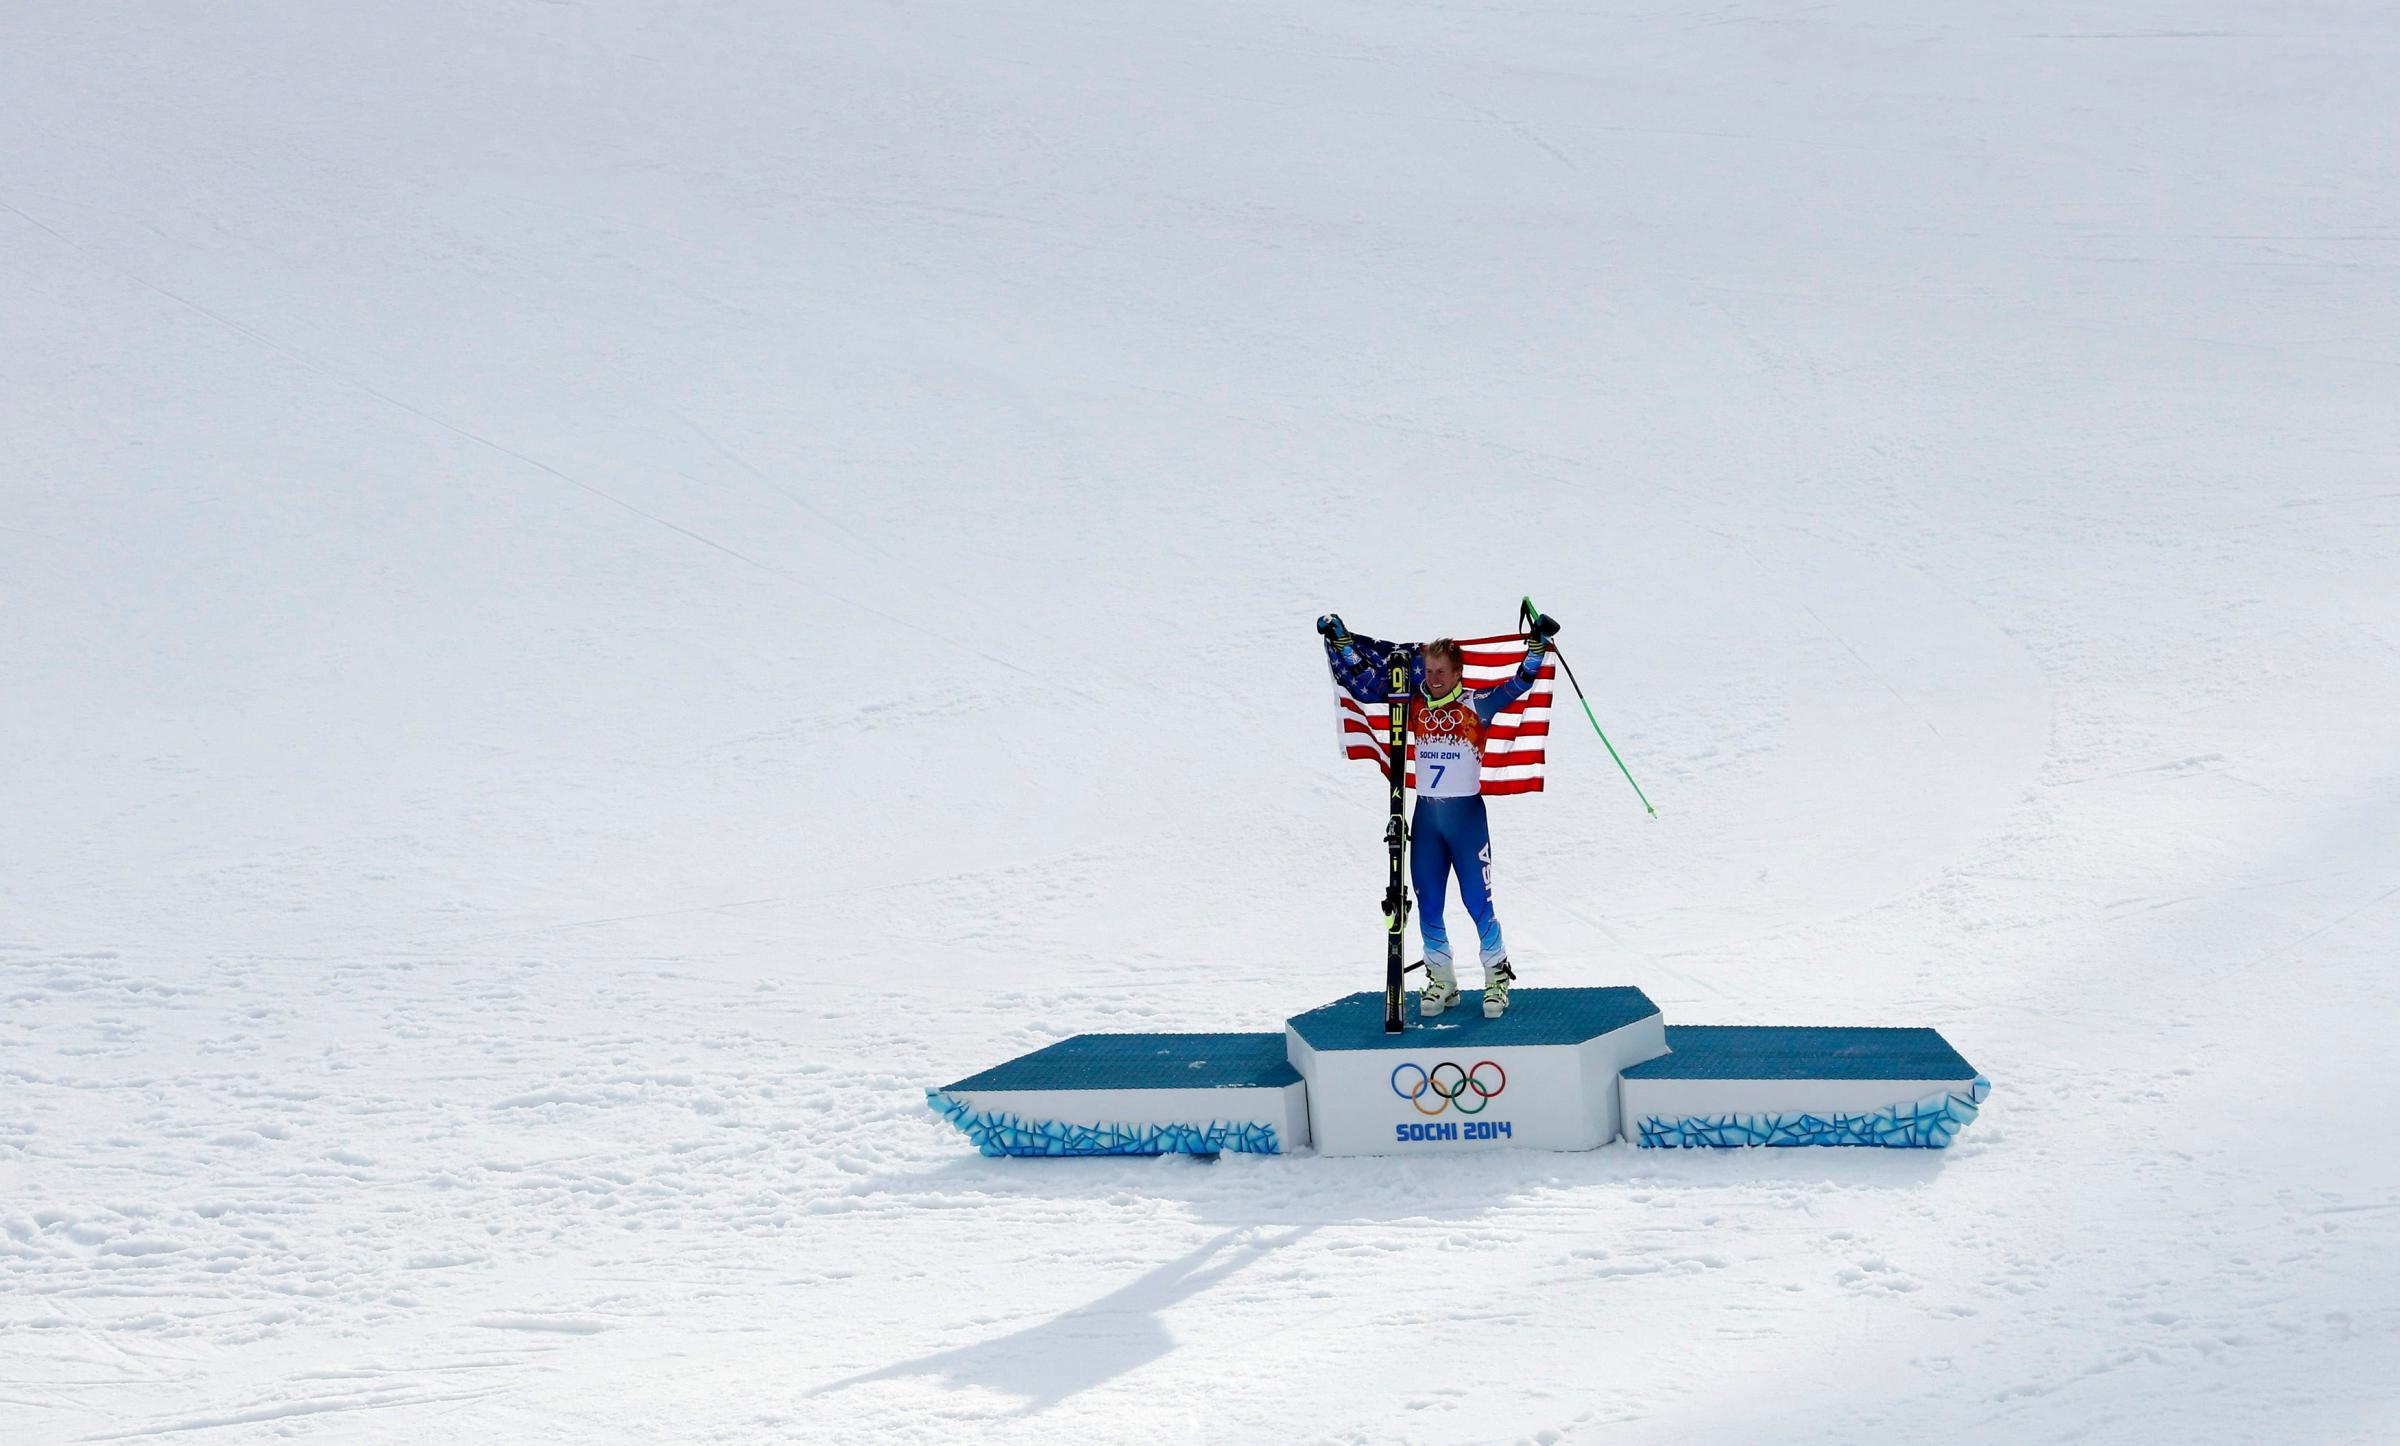 Winner Ted Ligety of the U.S. holds up his flag on the podium after the men's alpine skiing giant slalom event.